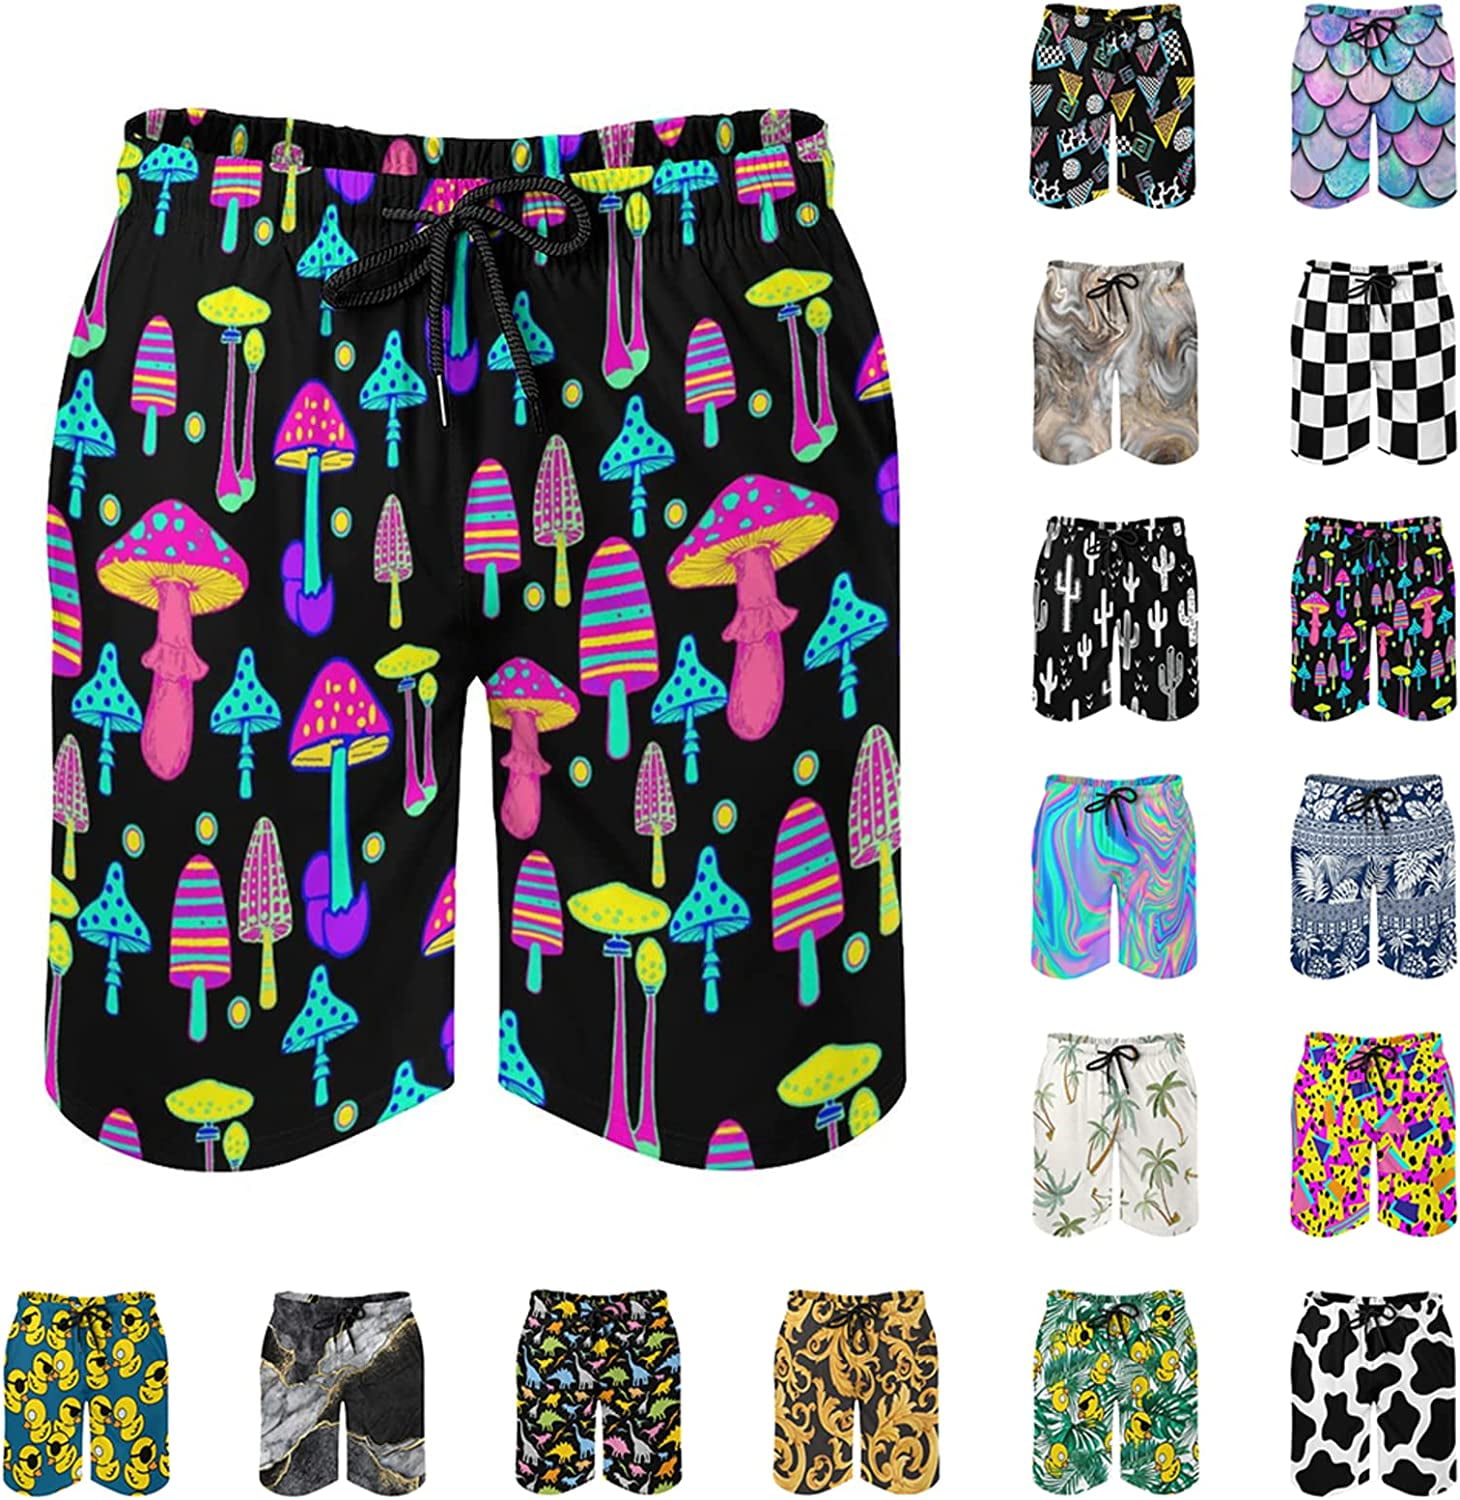  Men's Psychedelic Swim Trunks, Colorful Iridescent Quick-Dry  Hawaiian Swim Shorts for Men Series 10 Size S : Clothing, Shoes & Jewelry